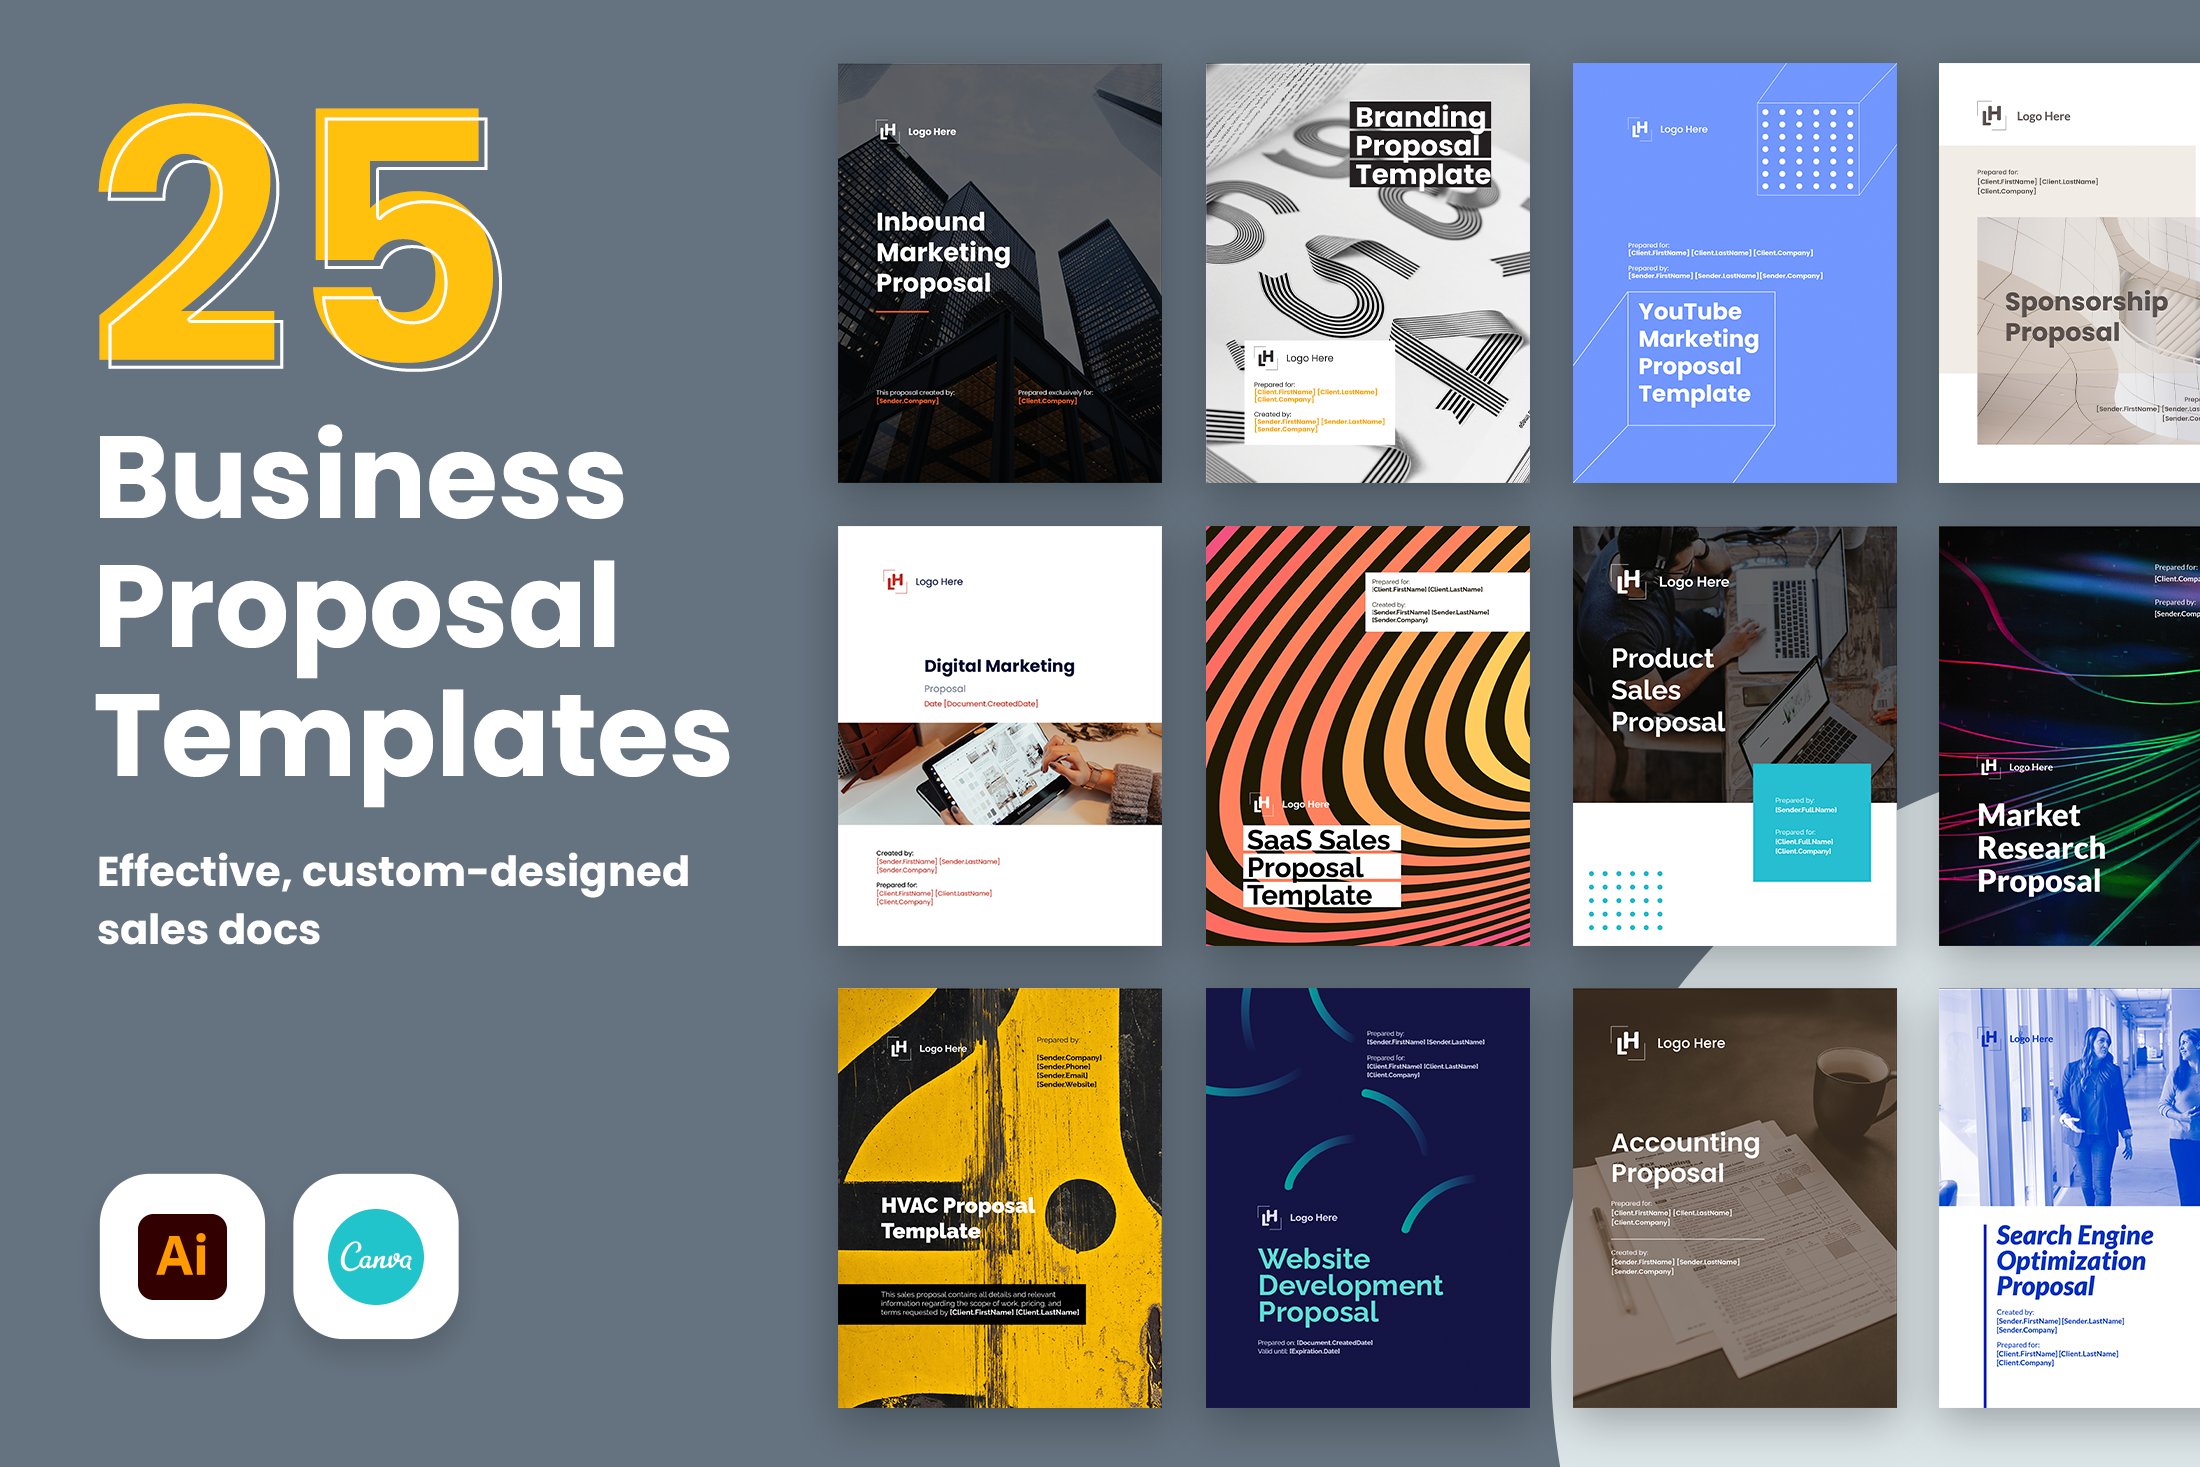 Business Proposal Templates | CANVA cover image.